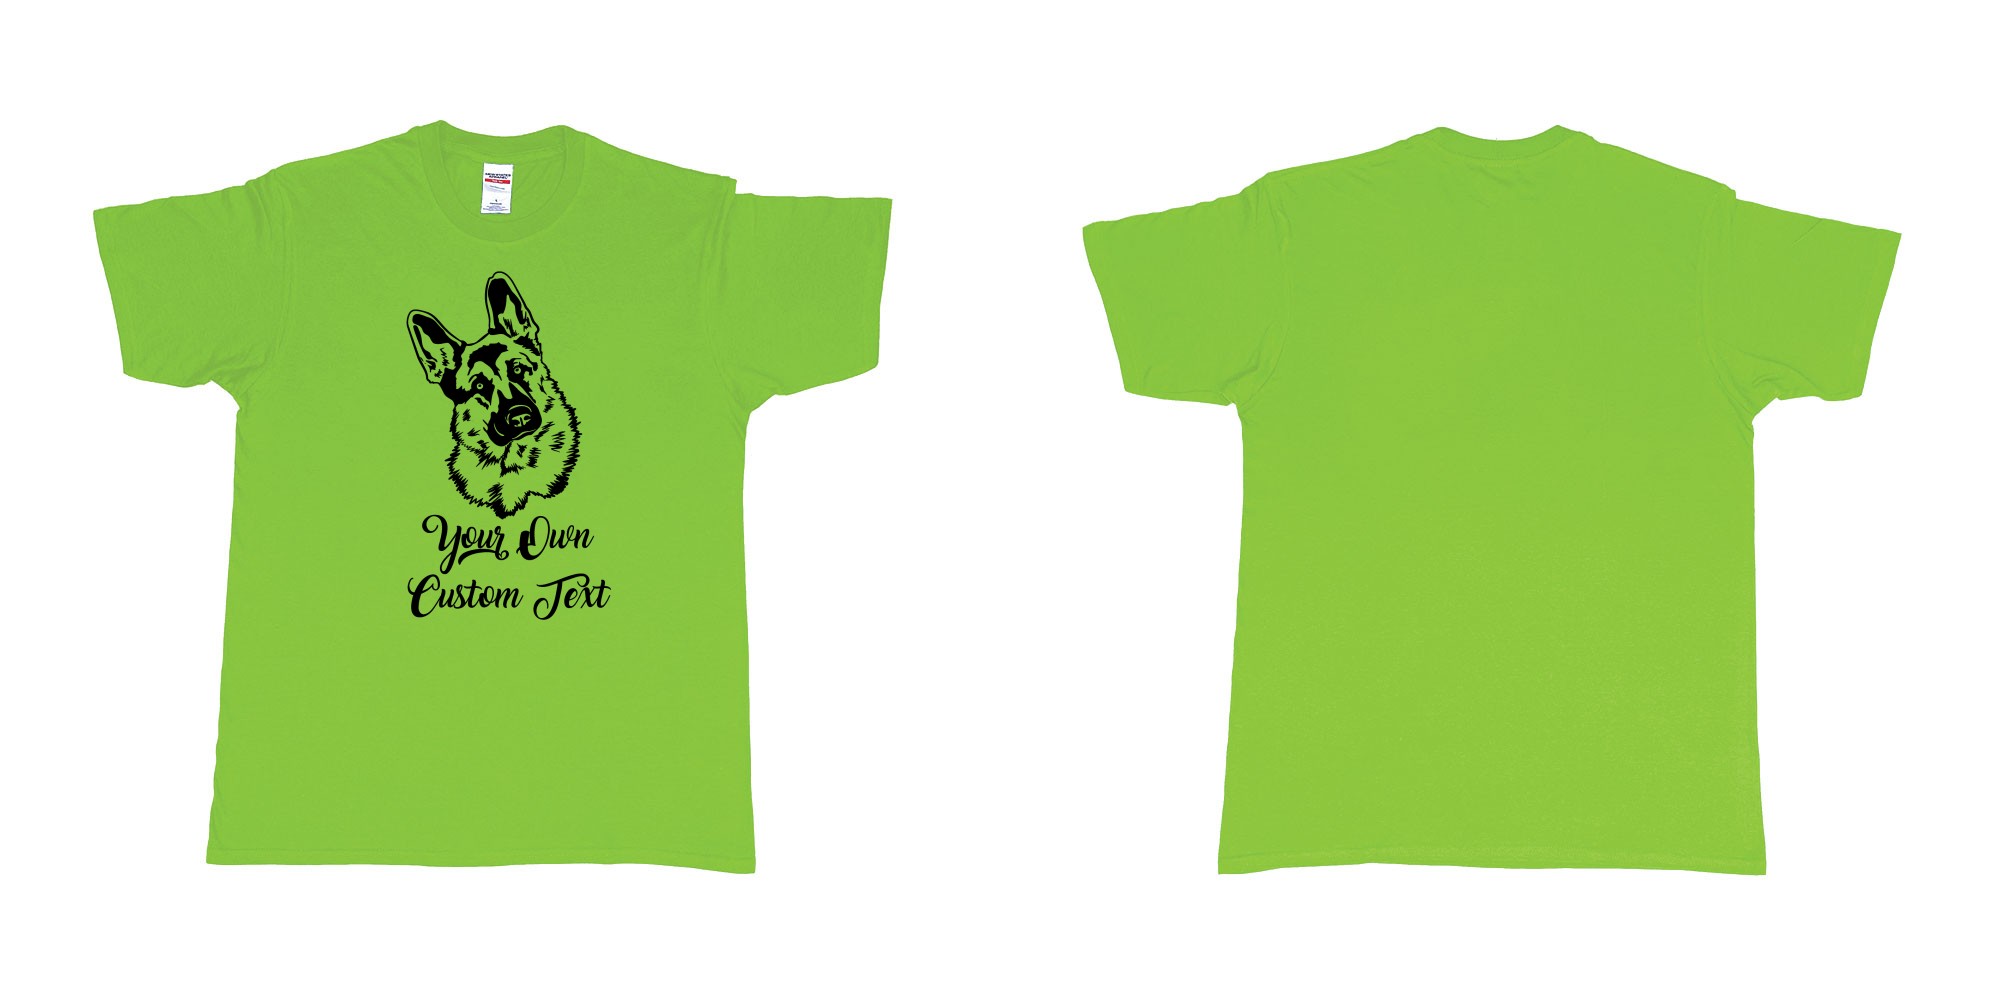 Custom tshirt design zack german shepherd tilts its head your own custom text in fabric color lime choice your own text made in Bali by The Pirate Way